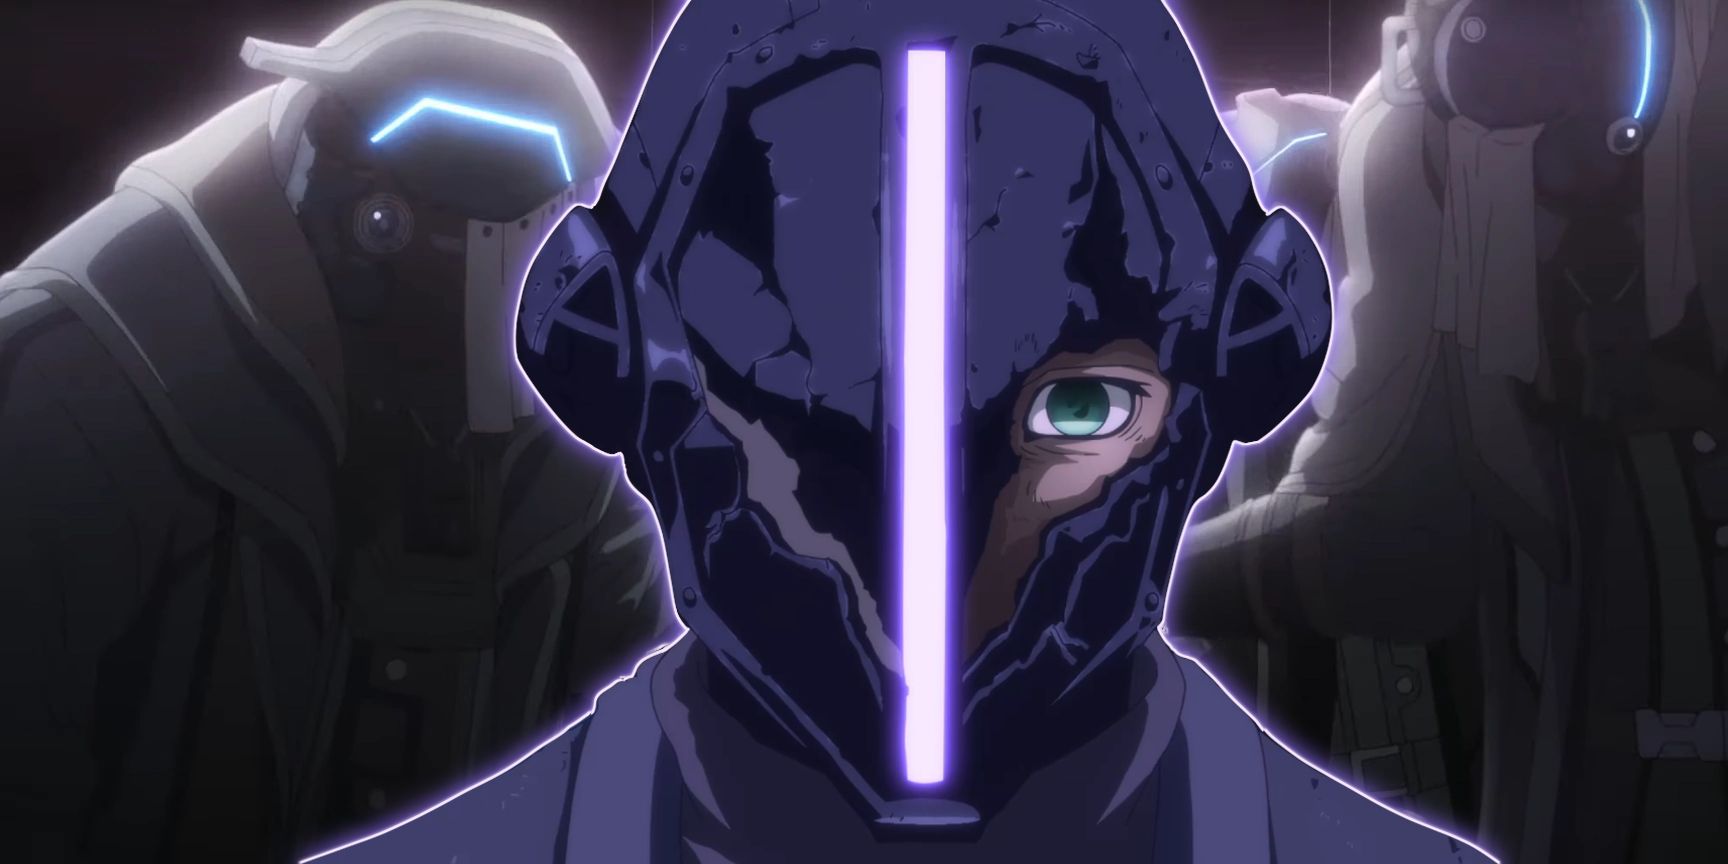 Made in Abyss: Bondrewd Is One of the Scariest Anime Villains of All Time